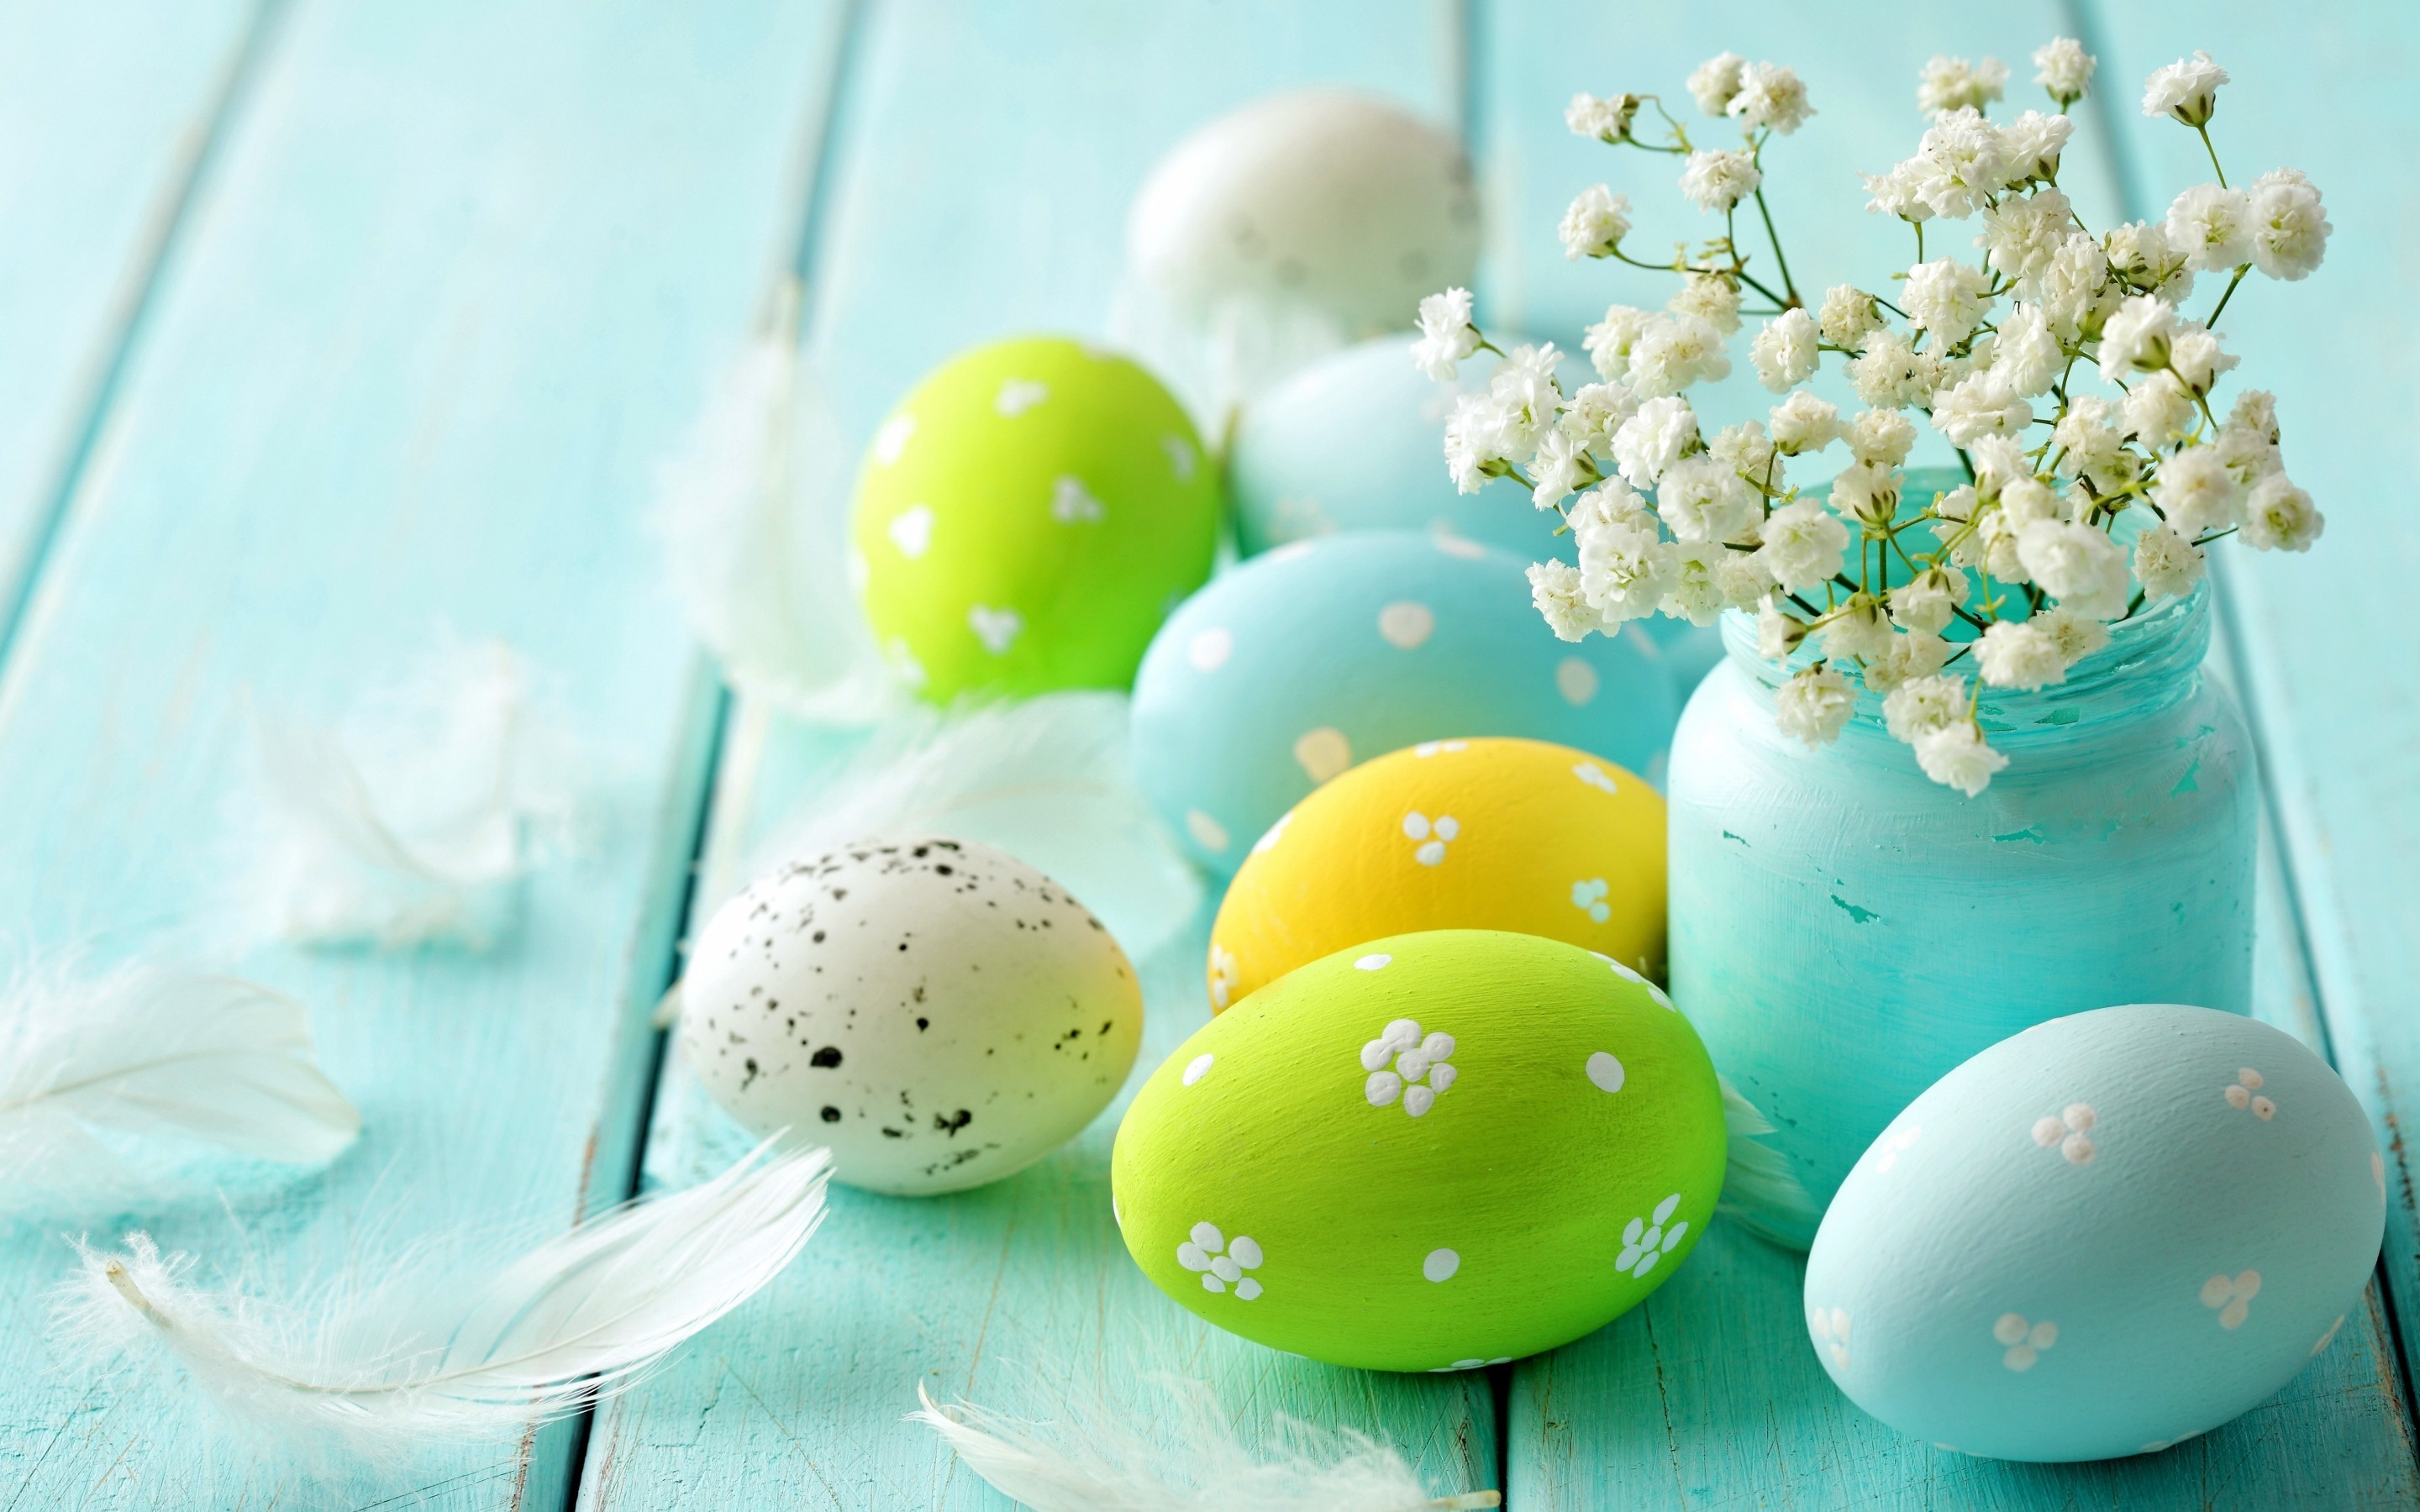 Vintage Easter Decorations for 2880 x 1800 Retina Display resolution